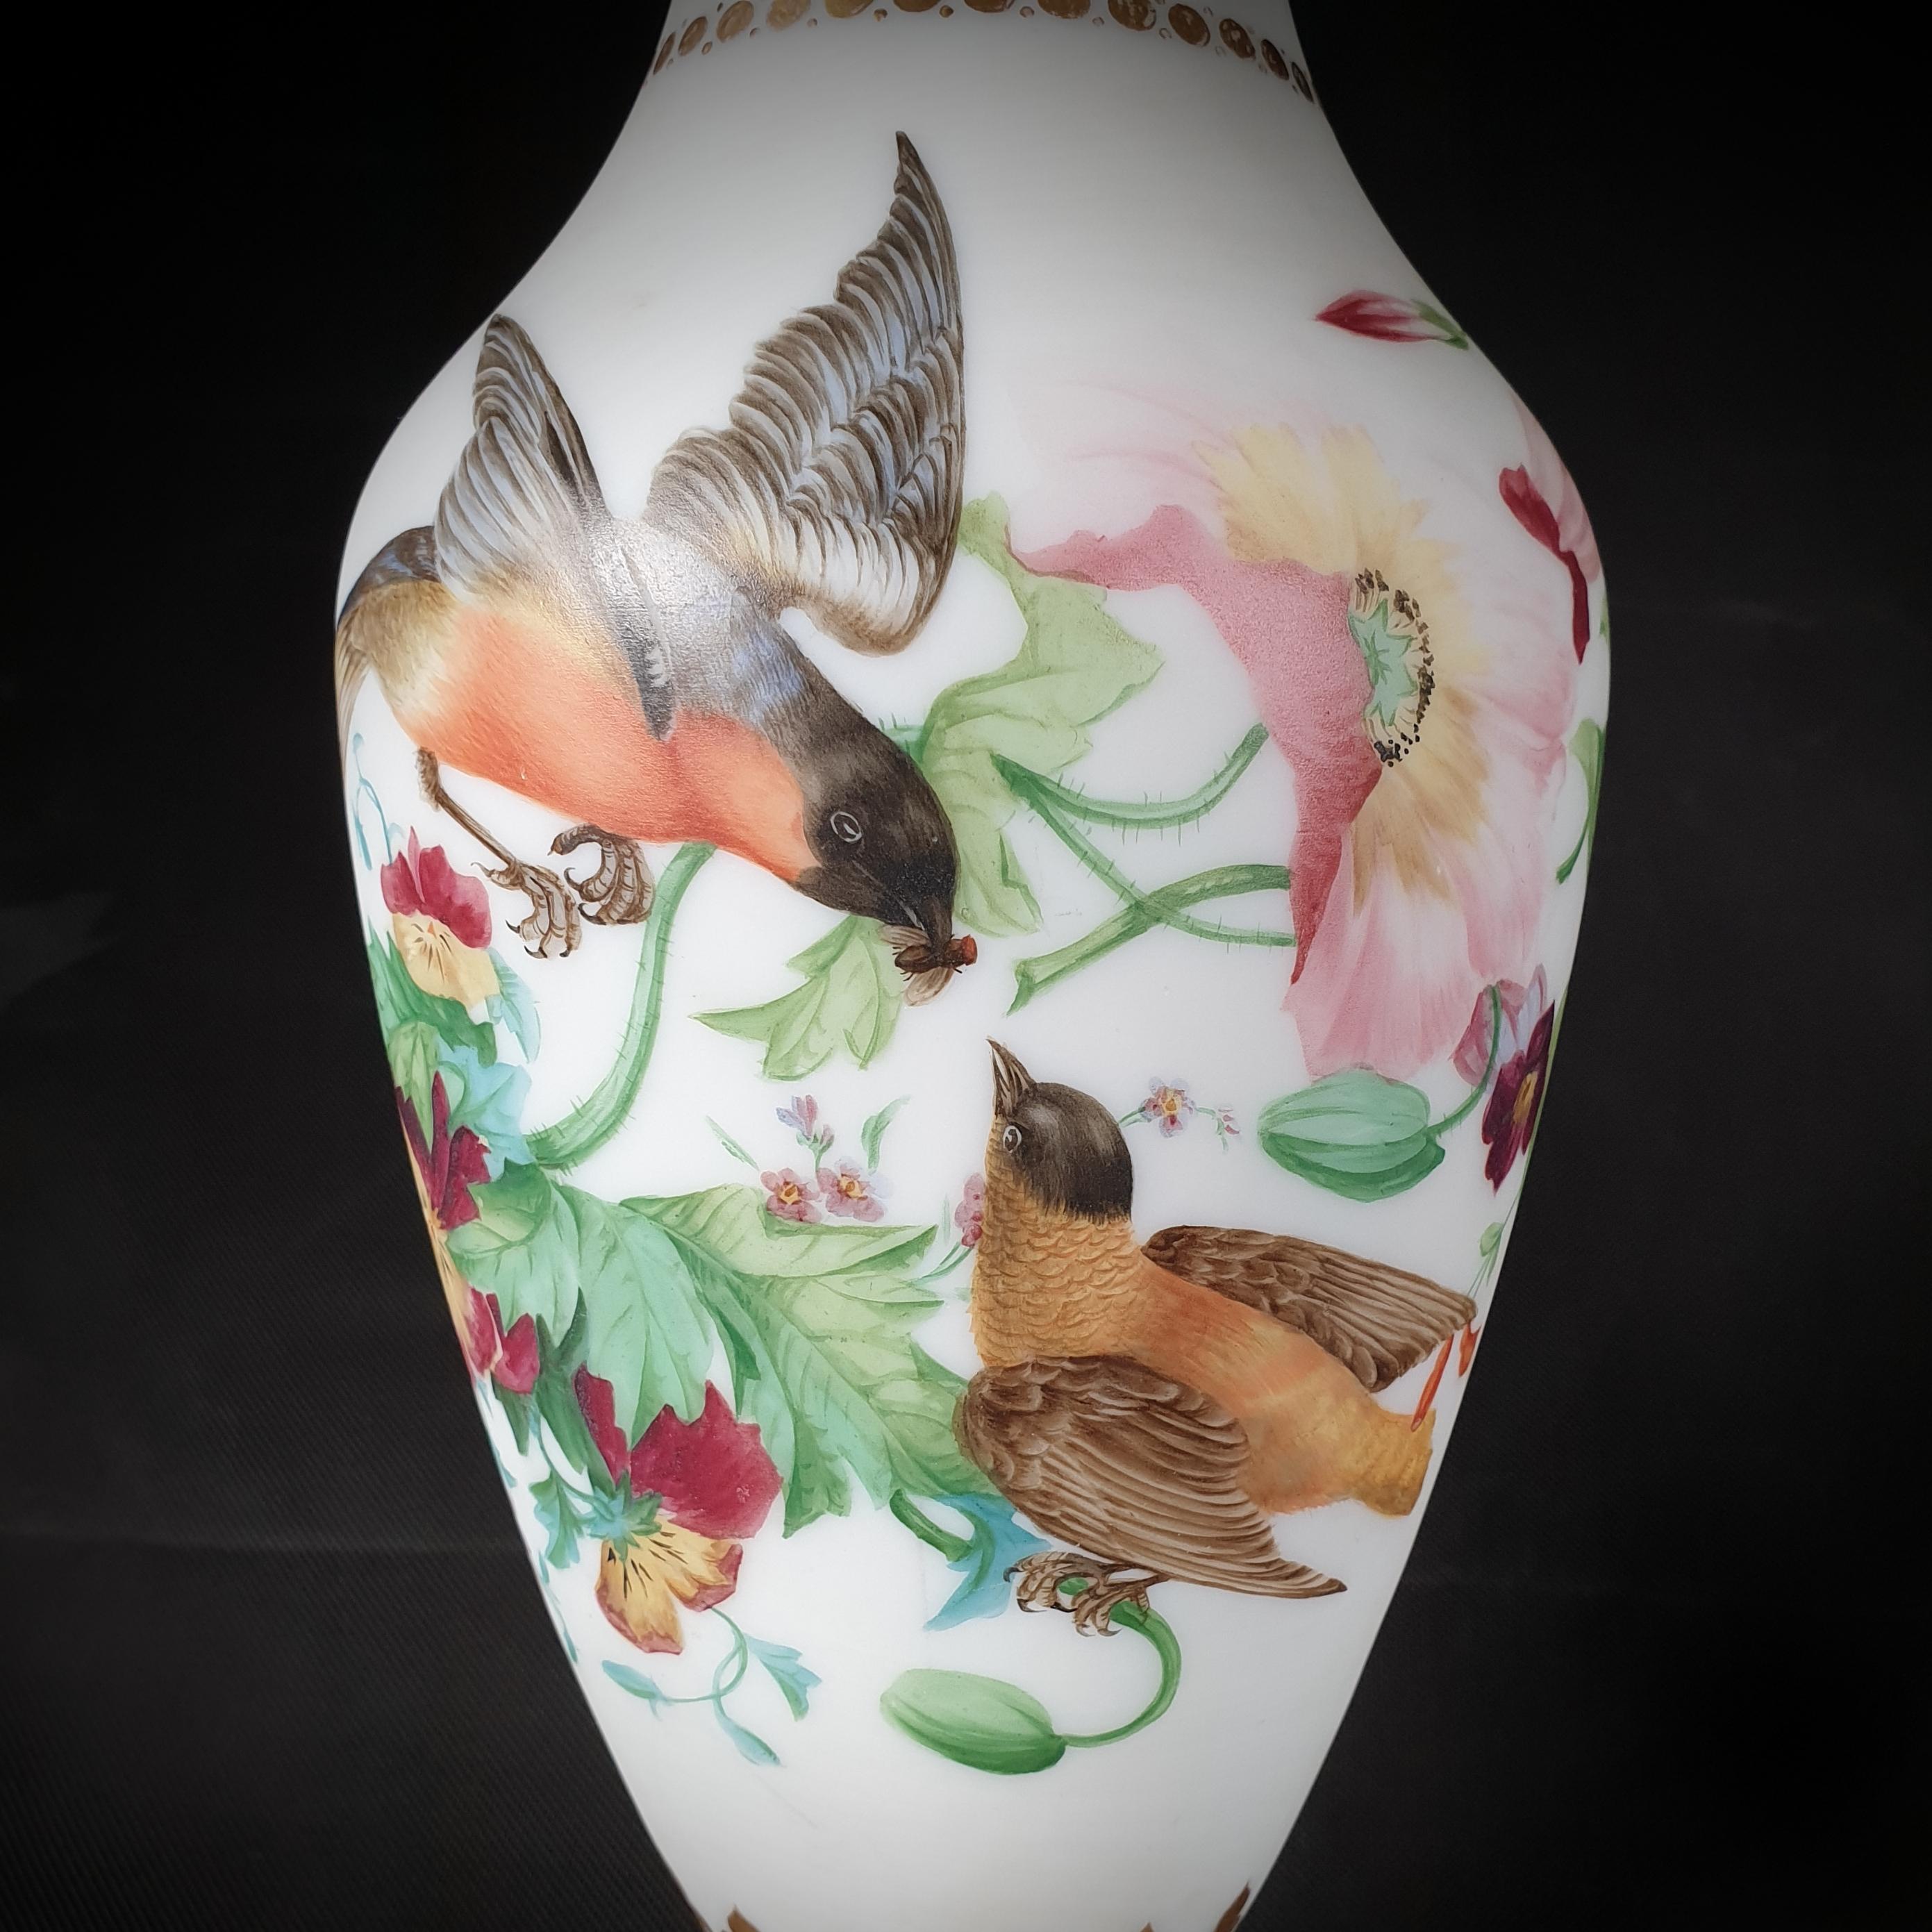 Pair of Opaque Opaline Glass Vases Hand-Painted with Birds and Flowers Late 19th In Good Condition For Sale In Queens Village, NY